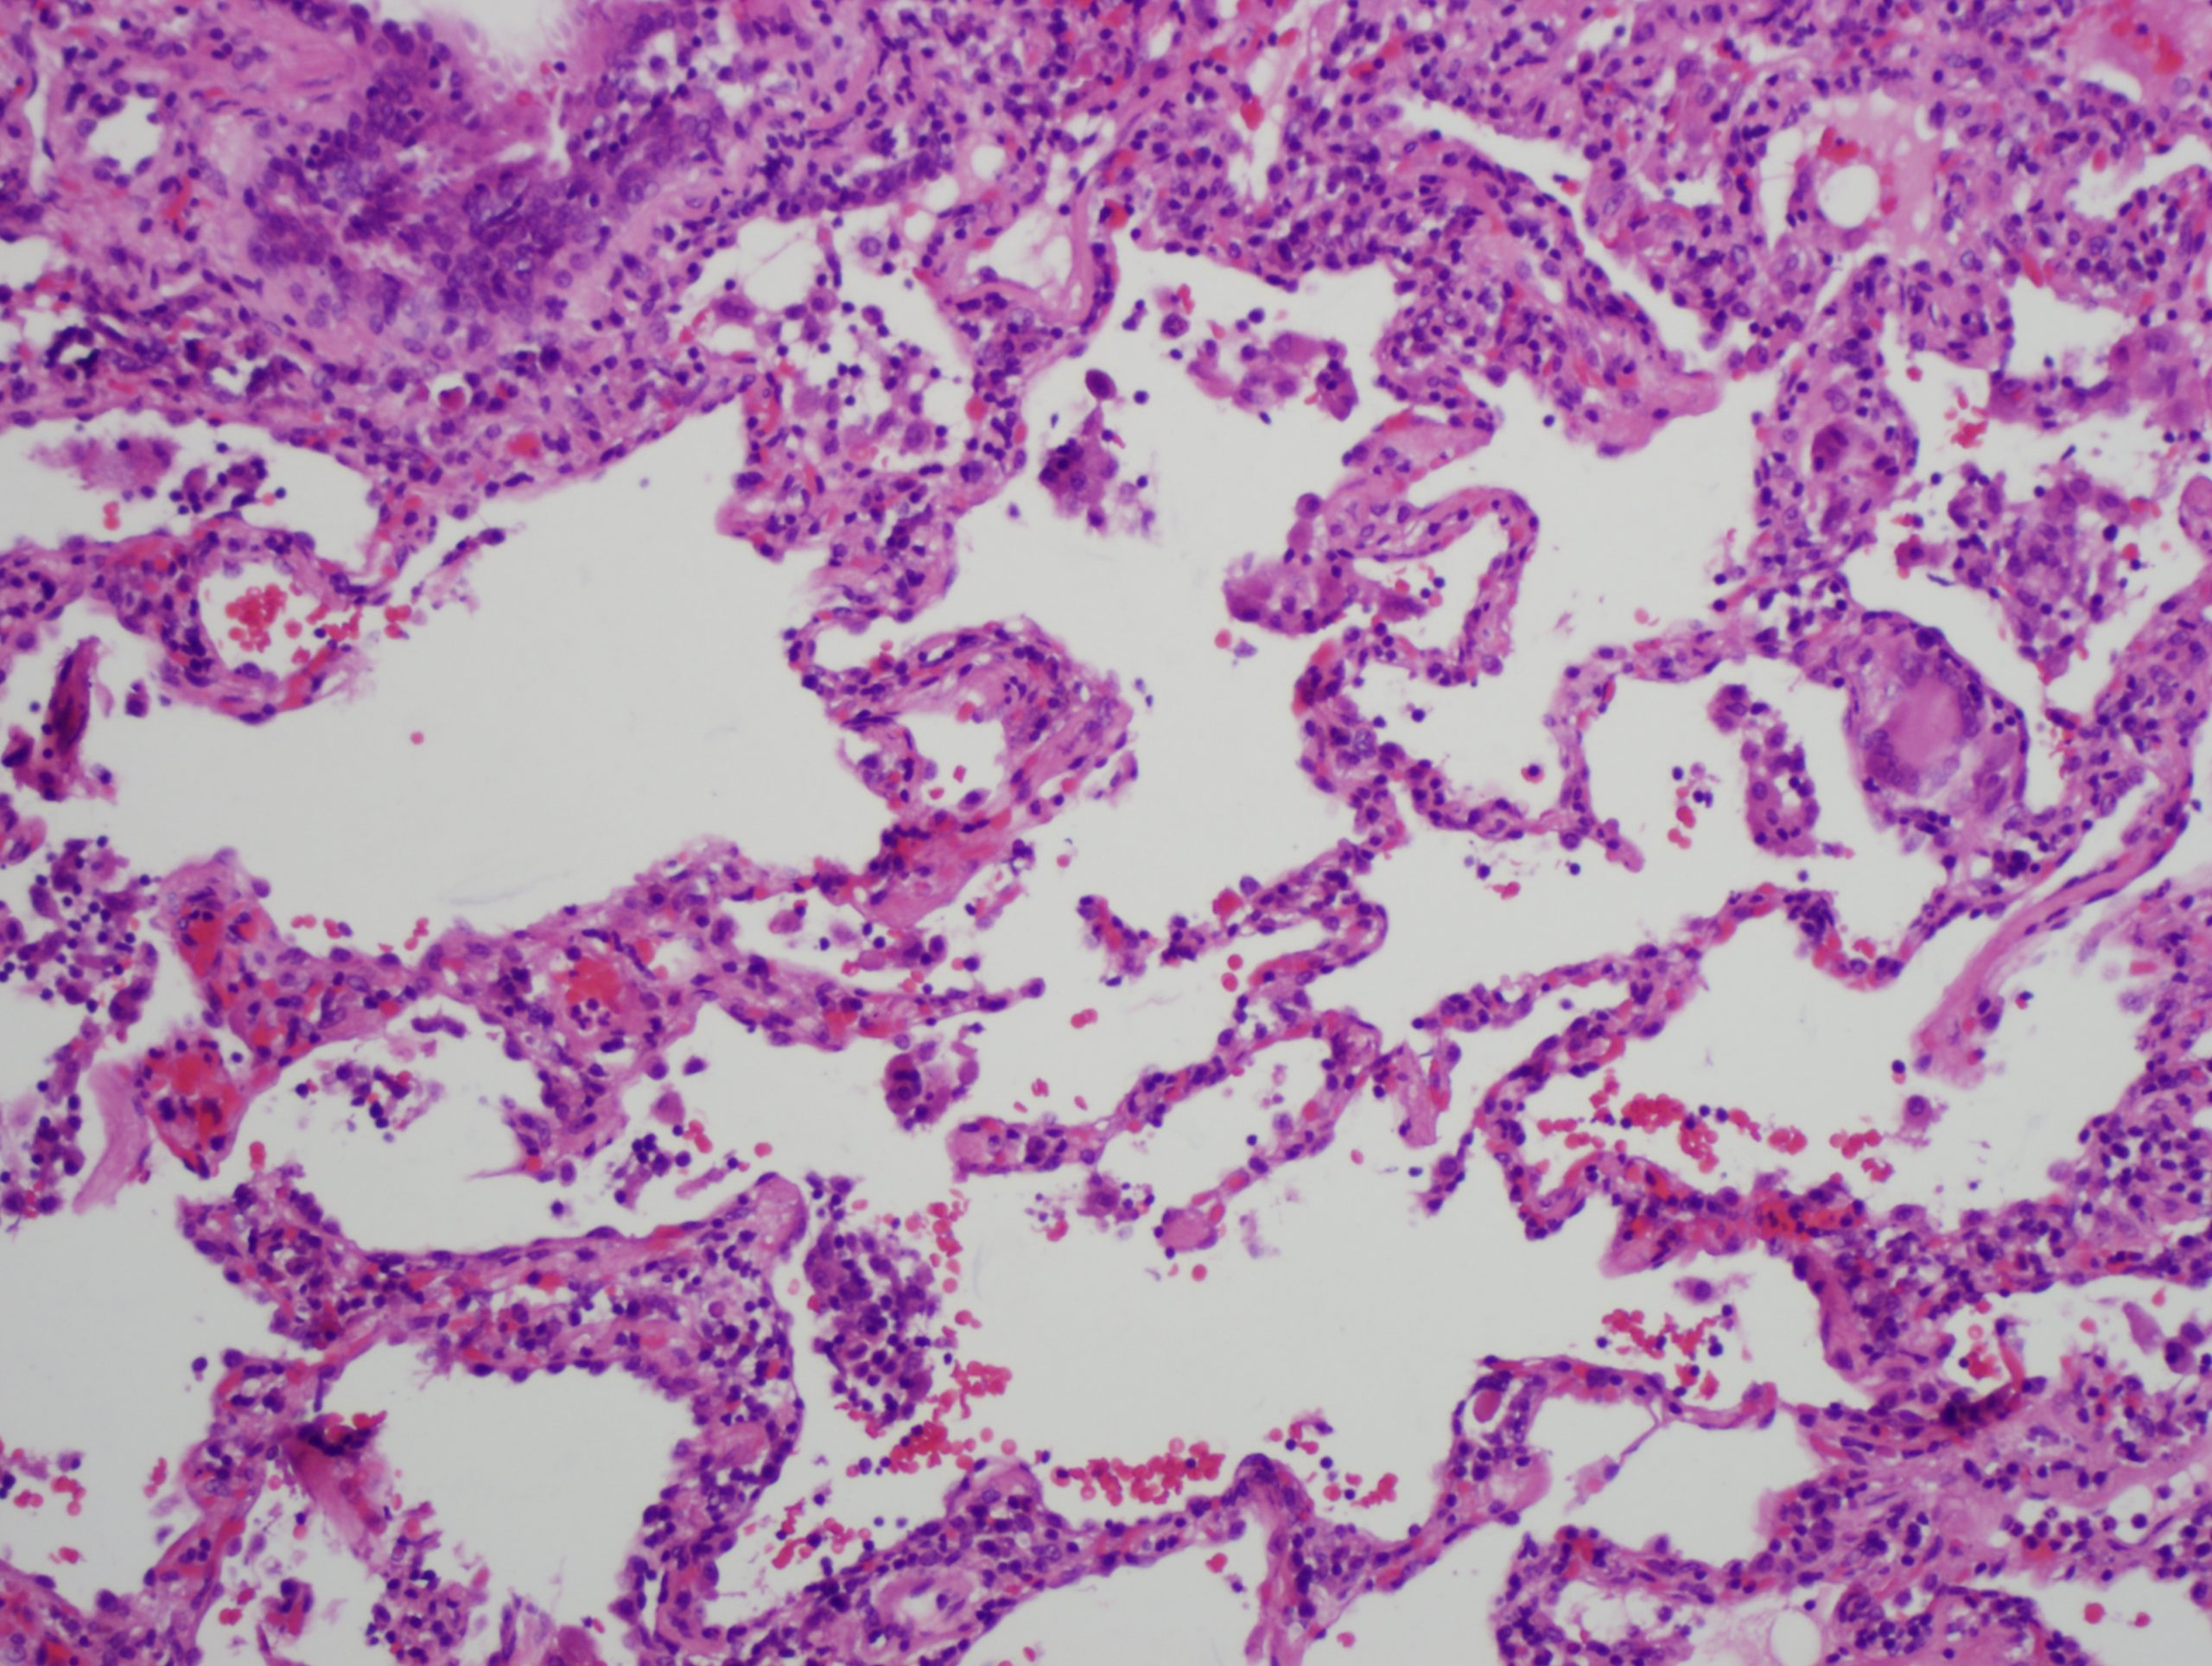 A histological slide of lung tissue shows open air spaces but there is severe thickening of the alveolar septum.